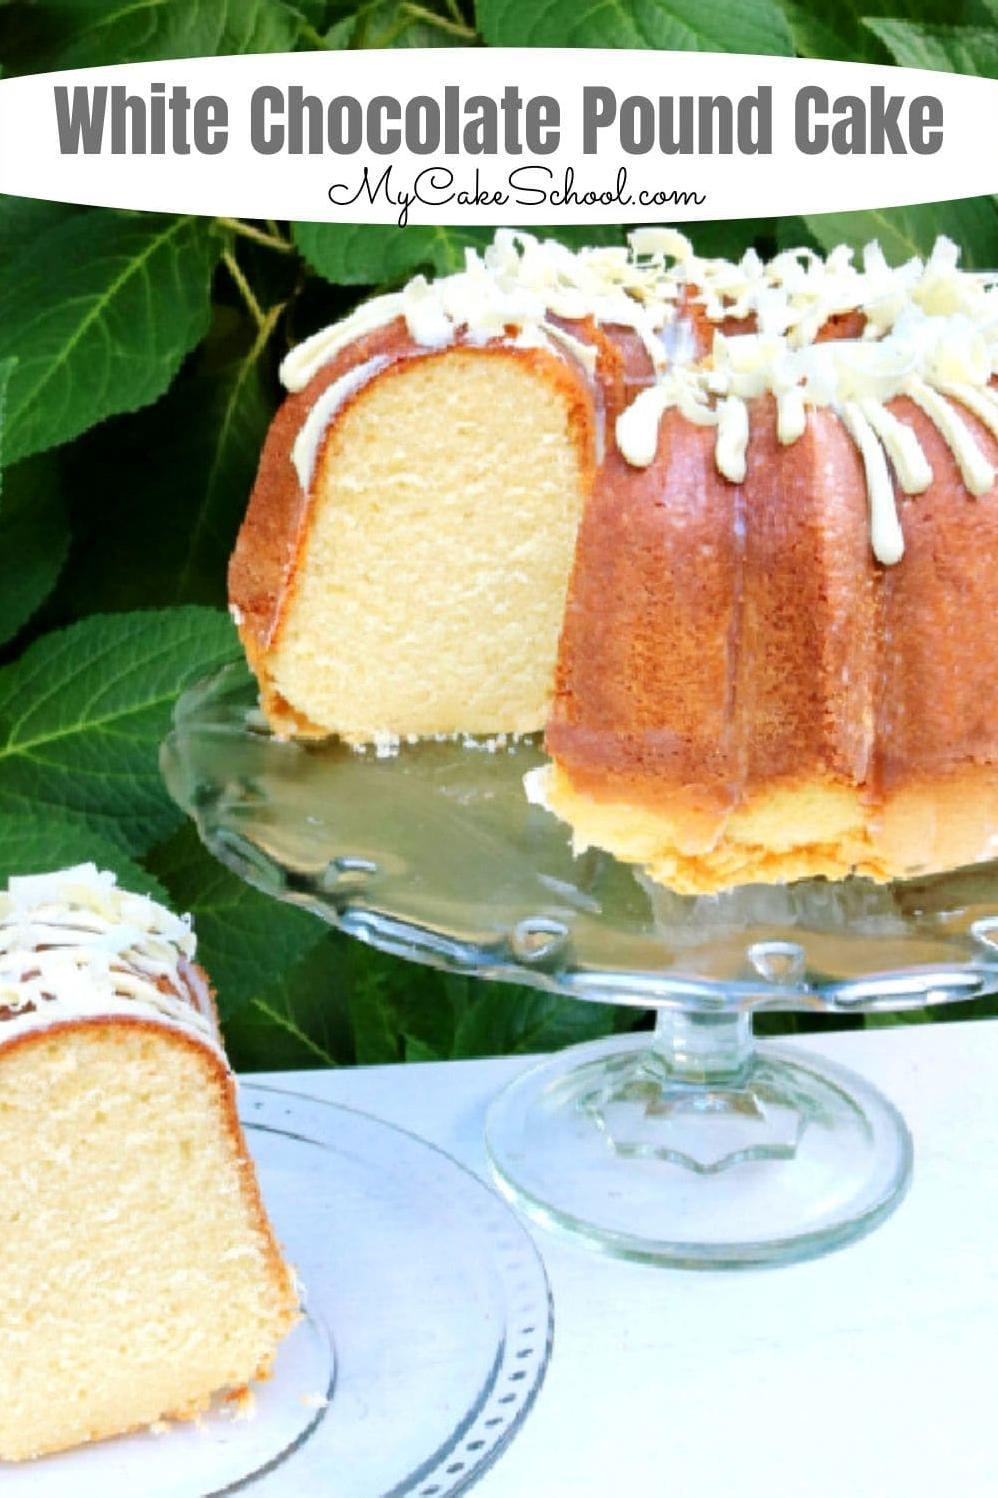  Can't resist sweet treats? This pound cake is calling your name!